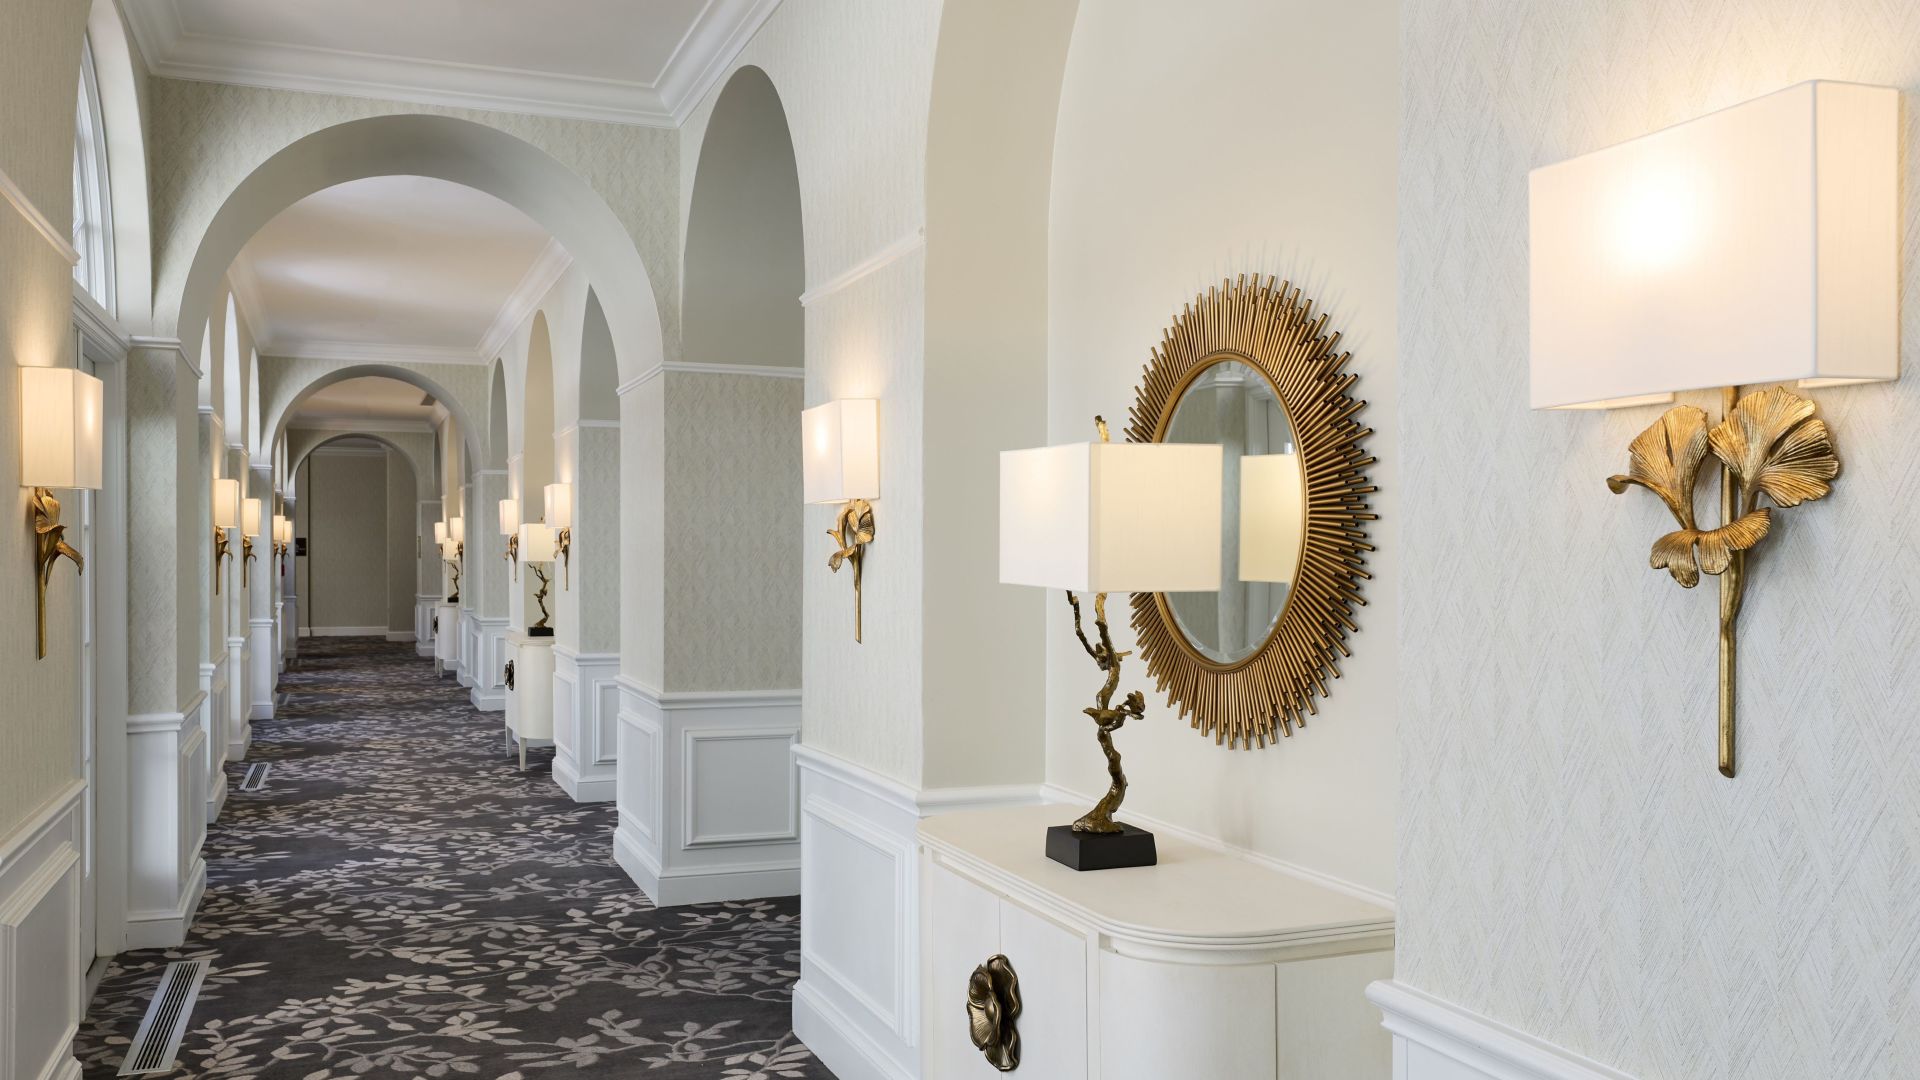 A Hallway With A Mirror And A Table With Lamps On It